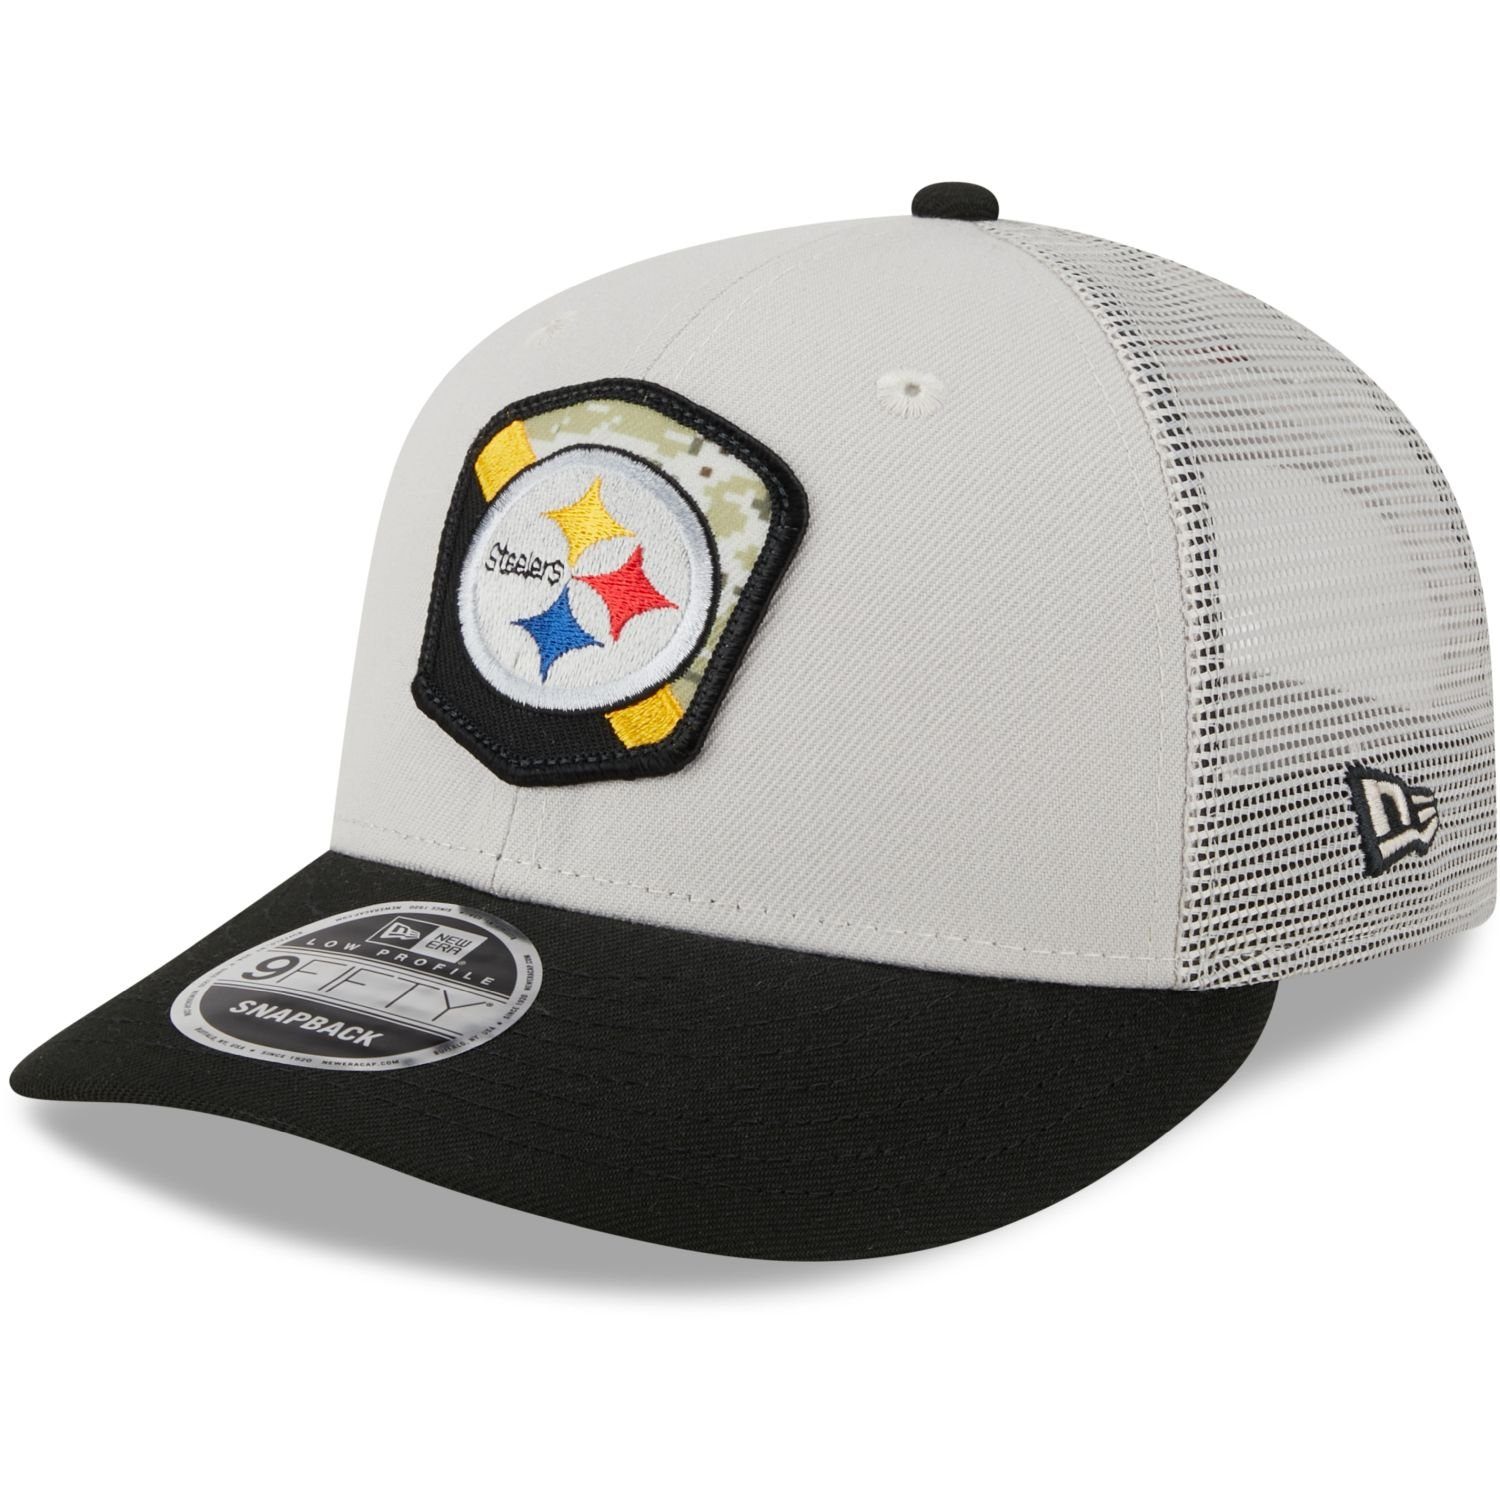 Low NFL Profile 9Fifty Cap Steelers Snap Pittsburgh Era New Salute Snapback to Service